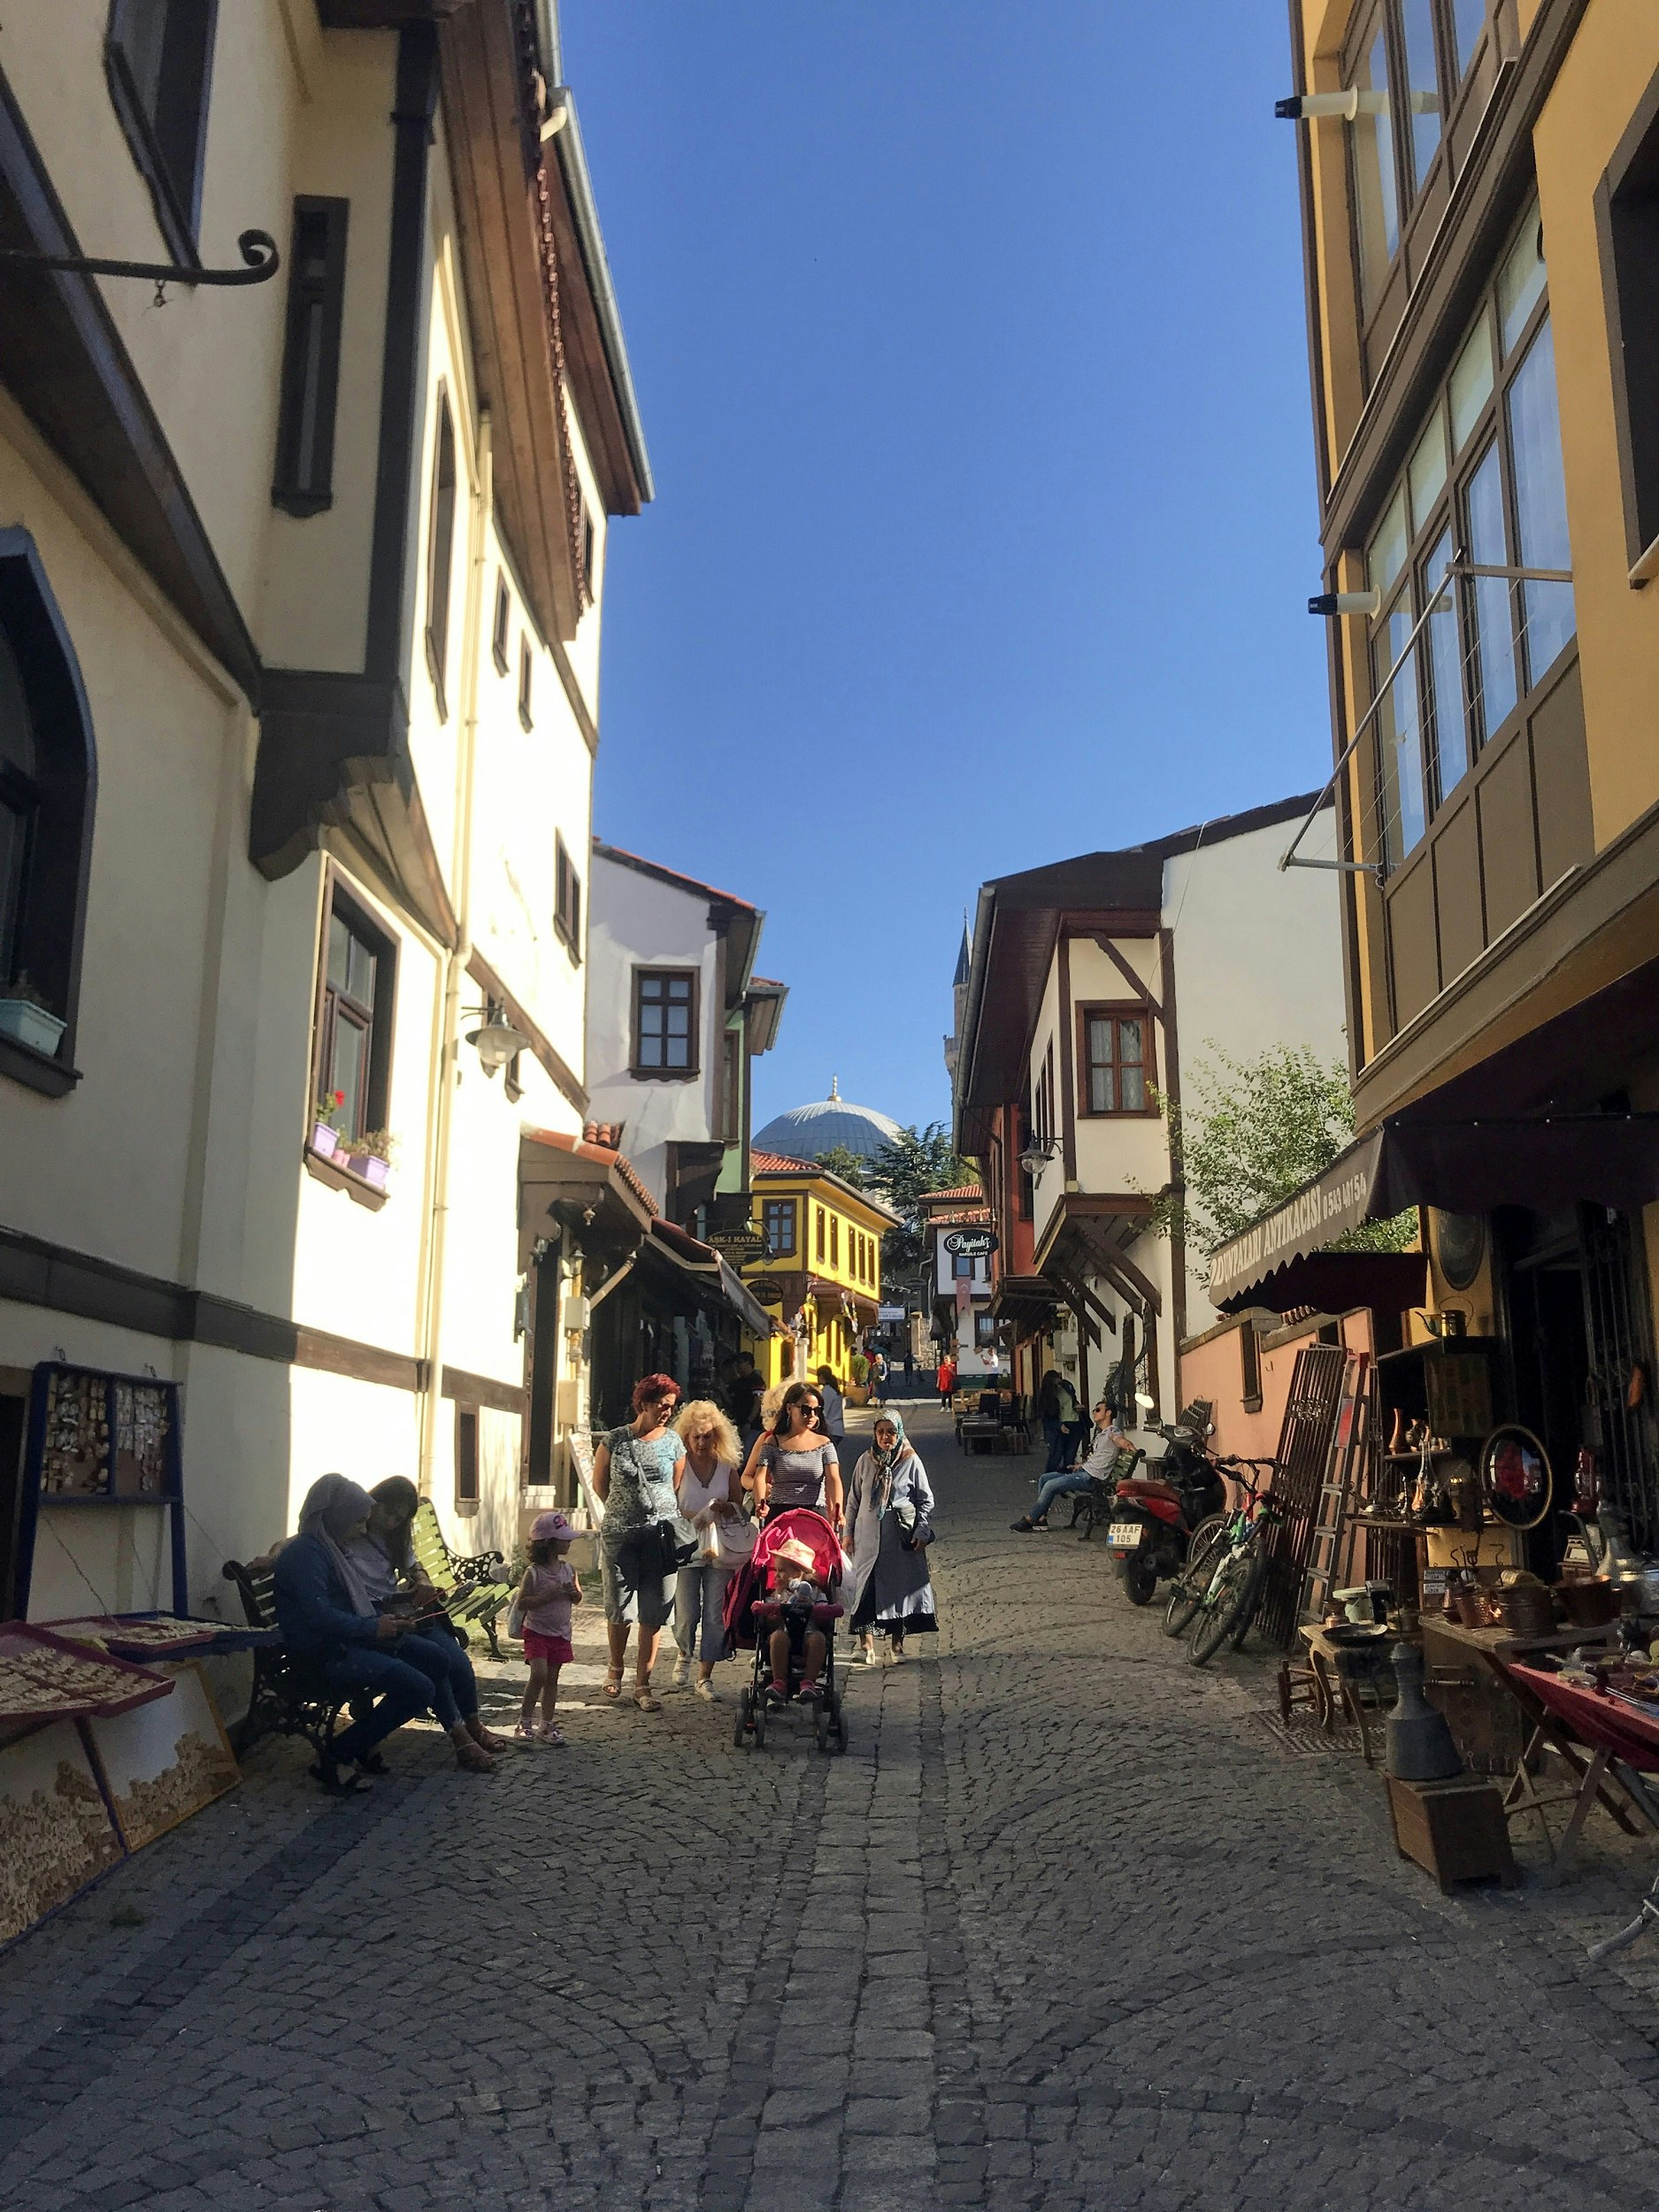 A cobbled street lined with traditional houses, some with shops or stalls alongside the road. A family strolls down the hill with a toddler and young child in a pram